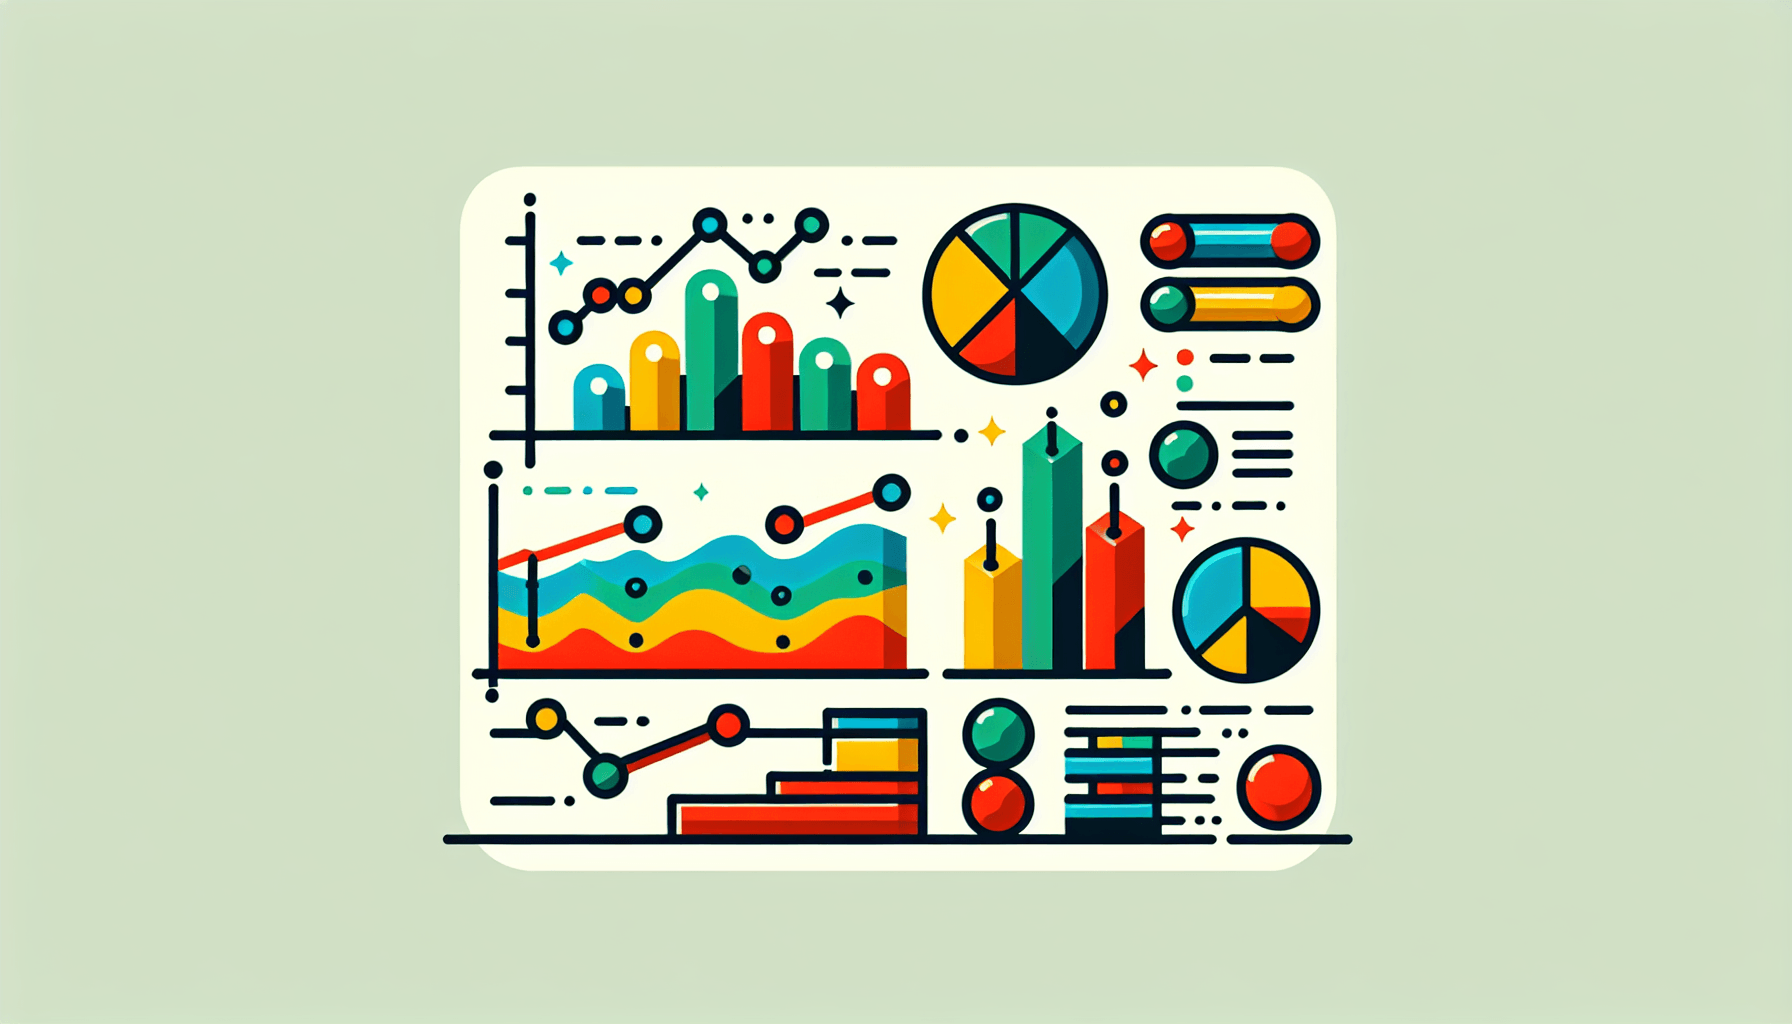 Chart in flat illustration style and white background, red #f47574, green #88c7a8, yellow #fcc44b, and blue #645bc8 colors.